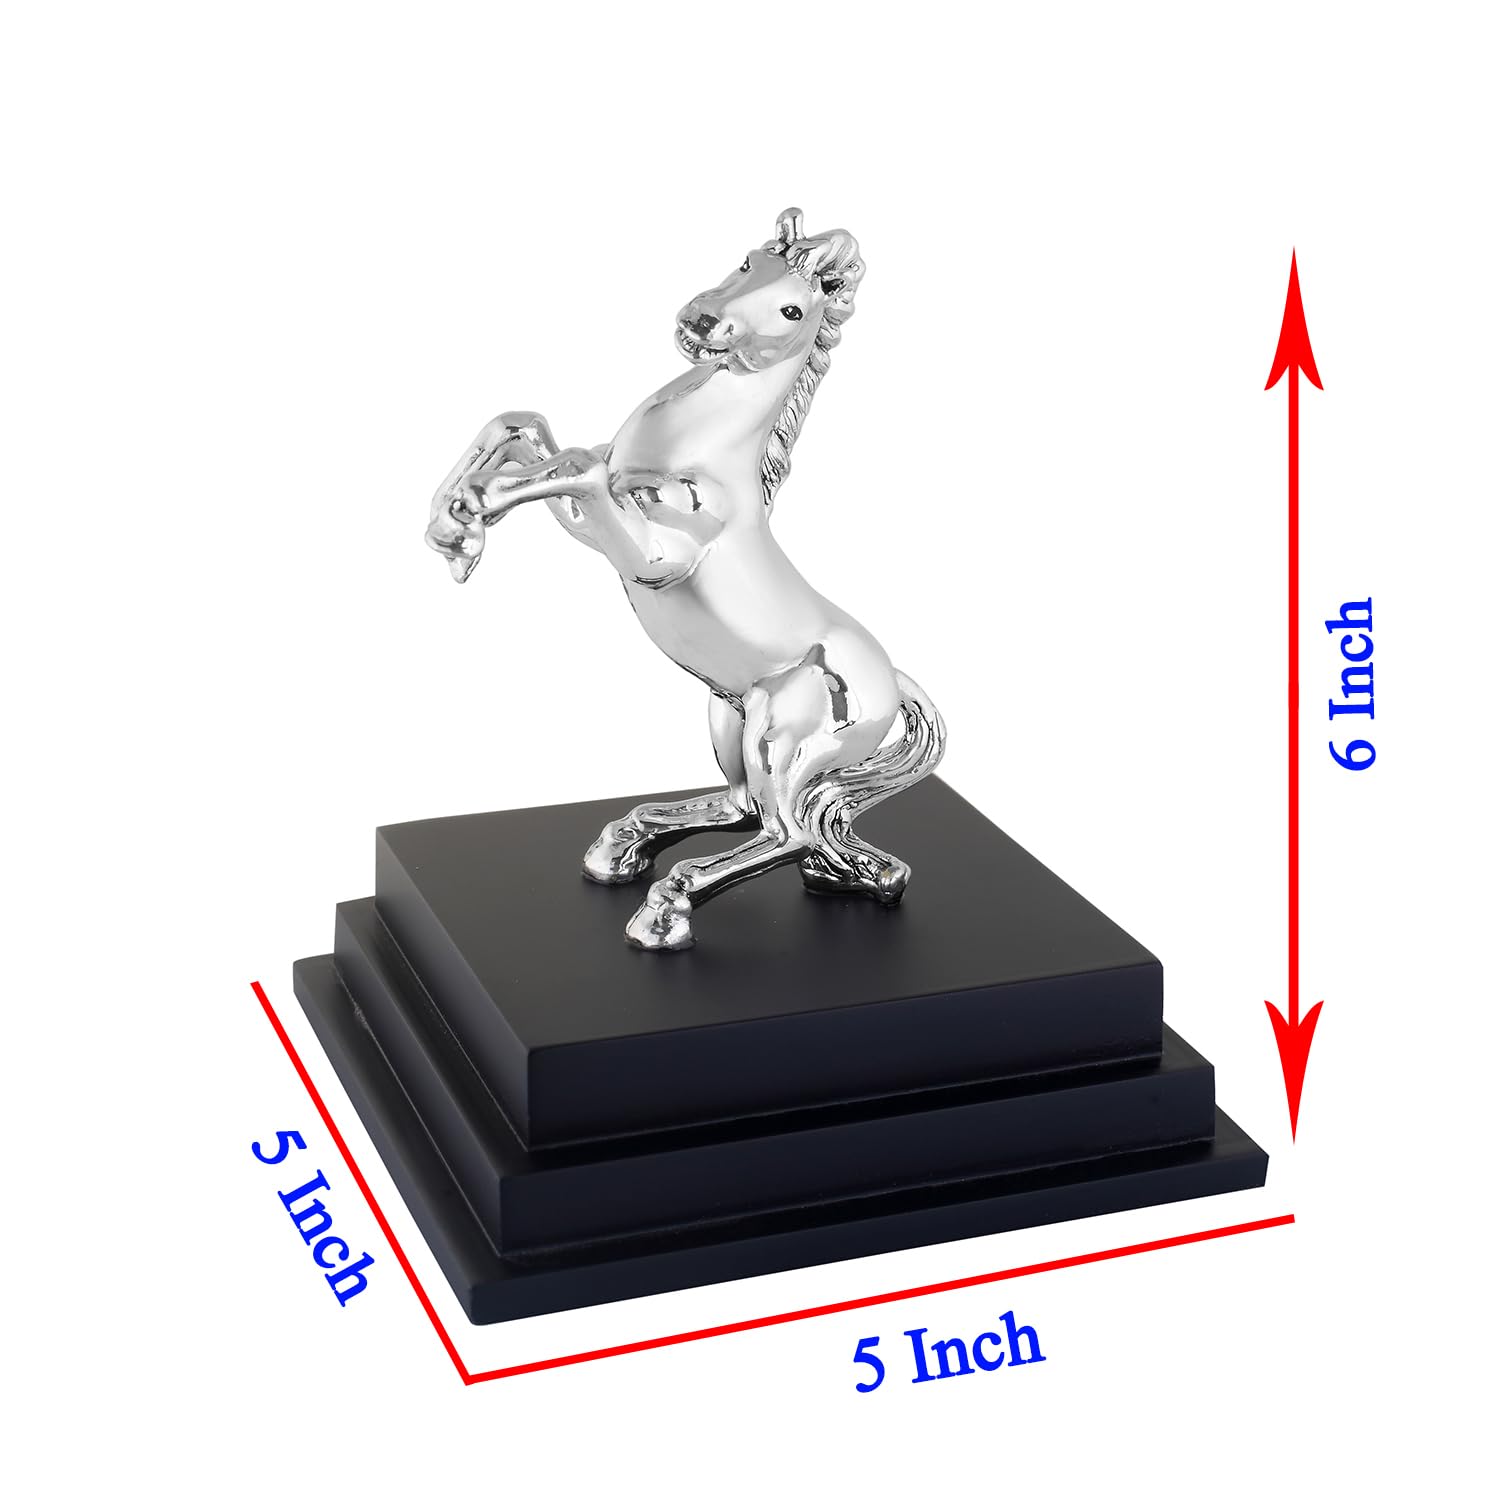 size of horse statue